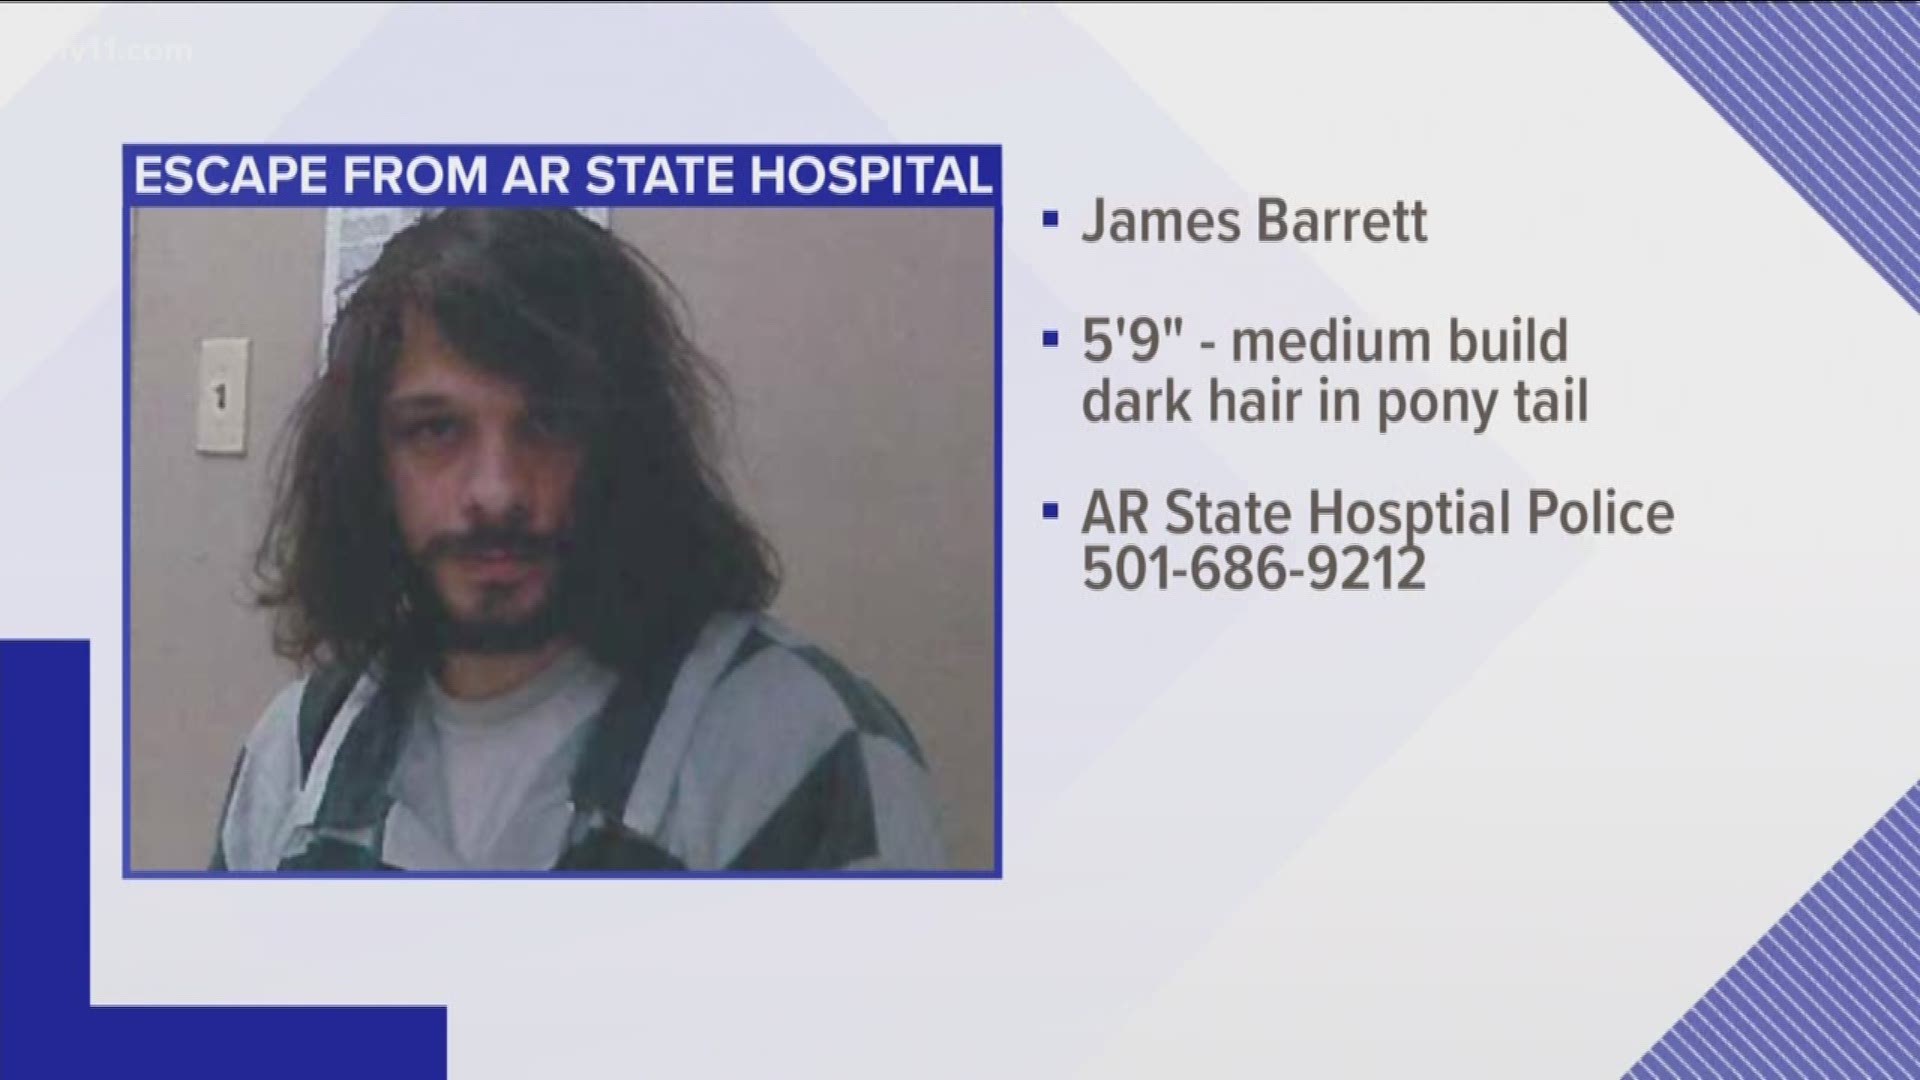 A man has escaped from the the Arkansas State Hospital, and authorities are asking people to keep an eye out.